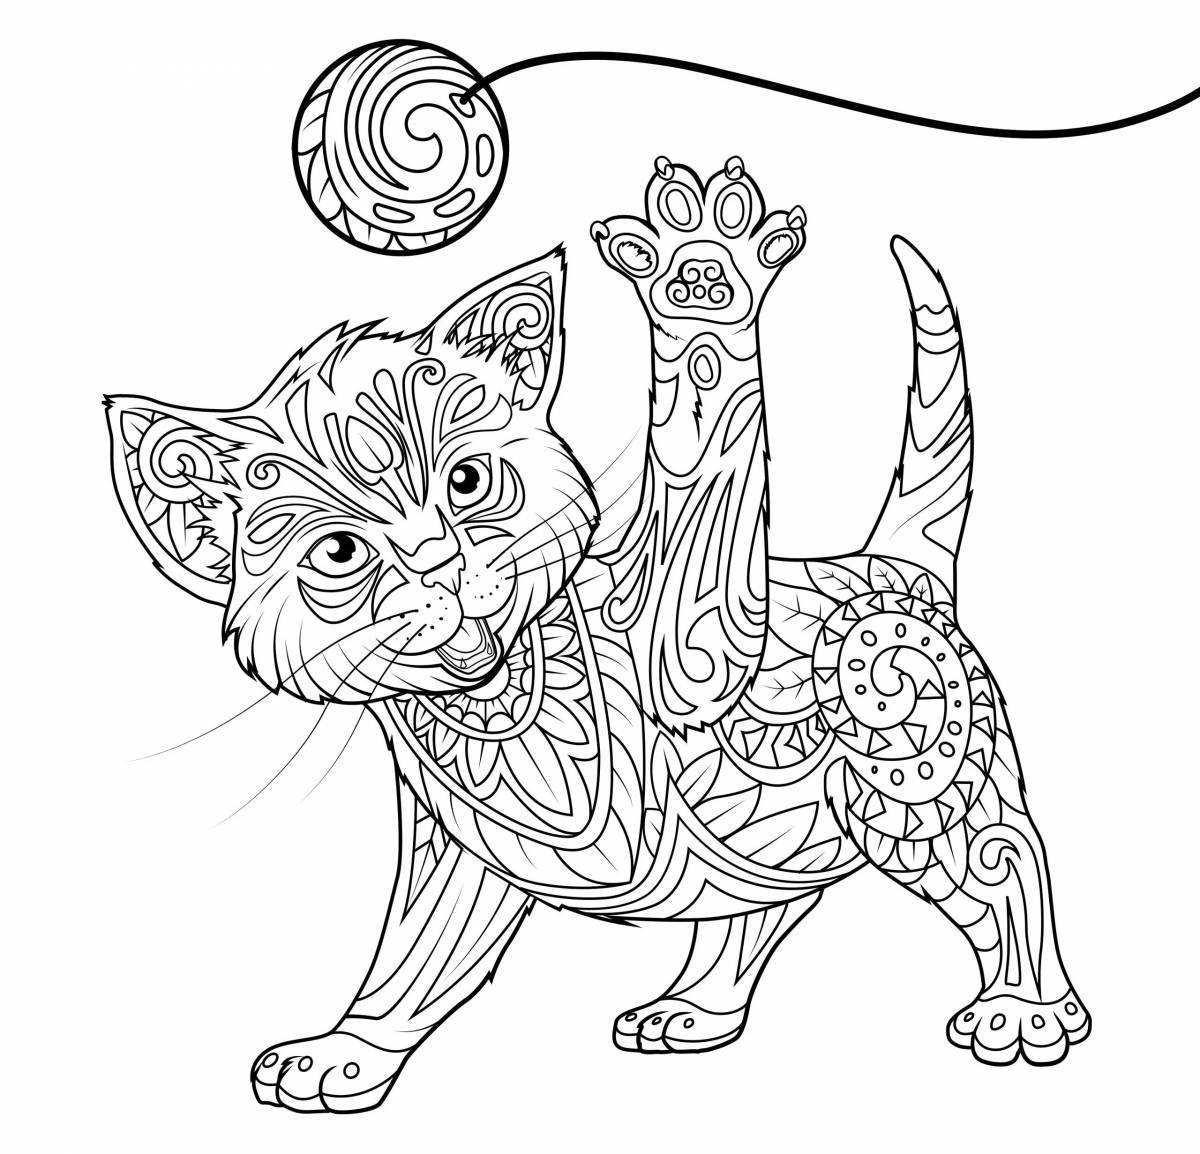 Coloring book with brightly patterned cat